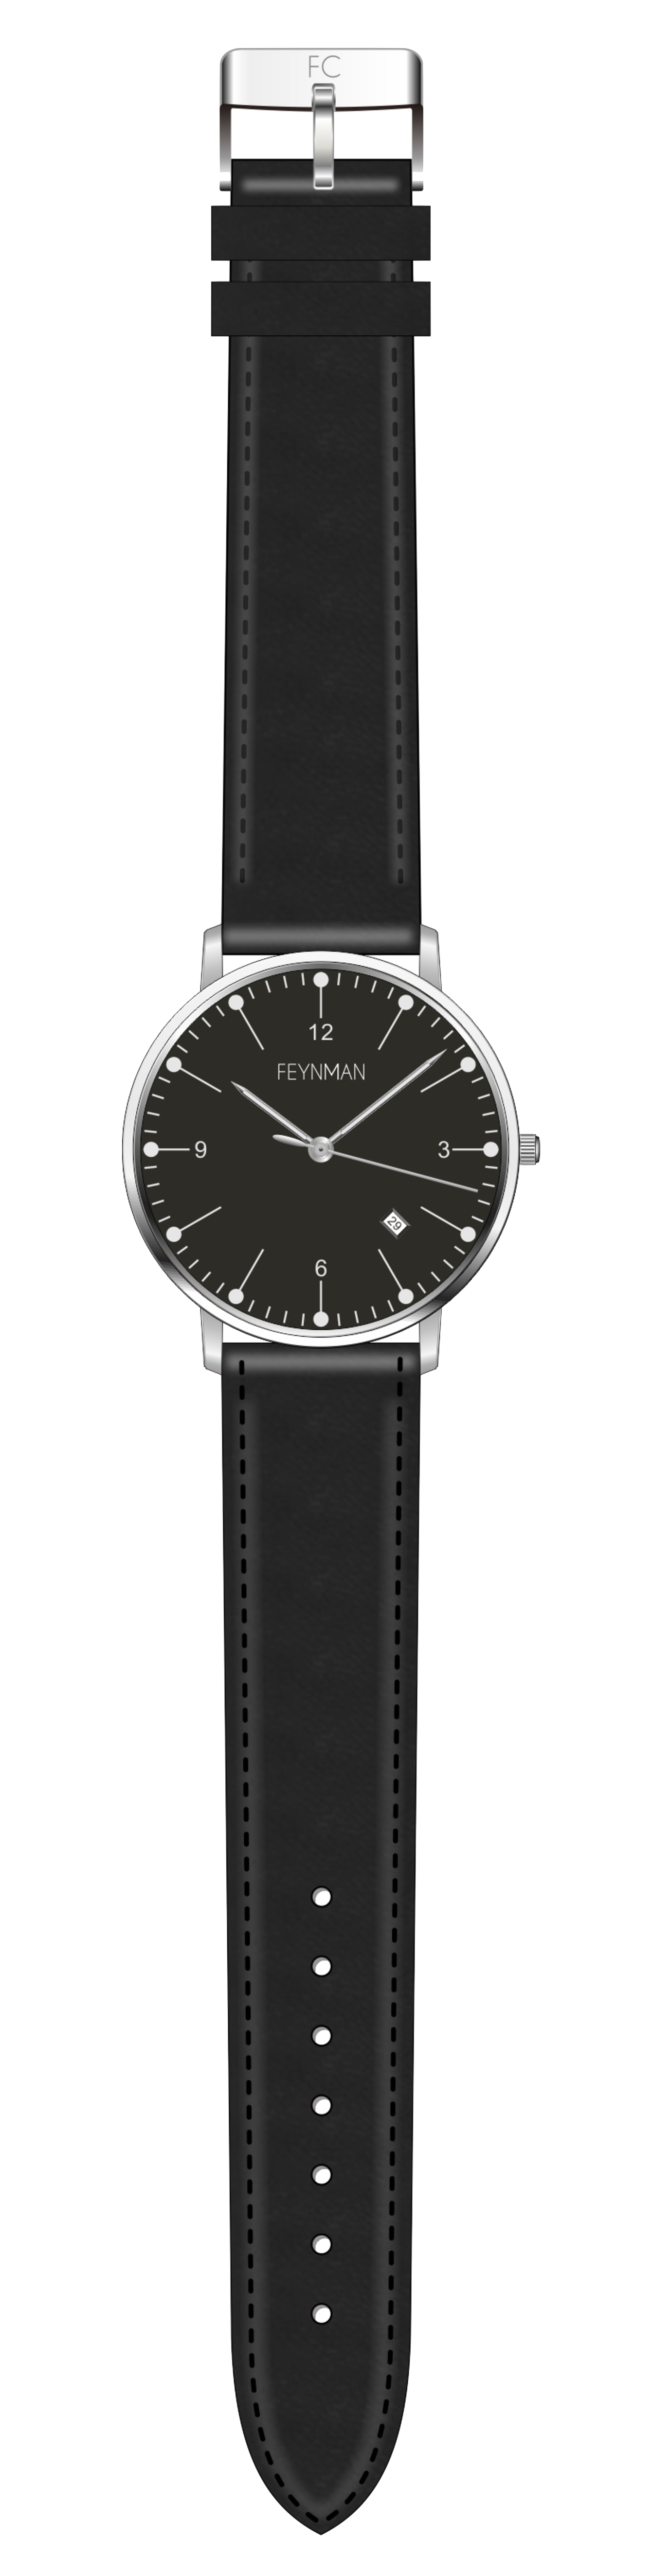 Frontal view of the Feynman CWII wristwatch